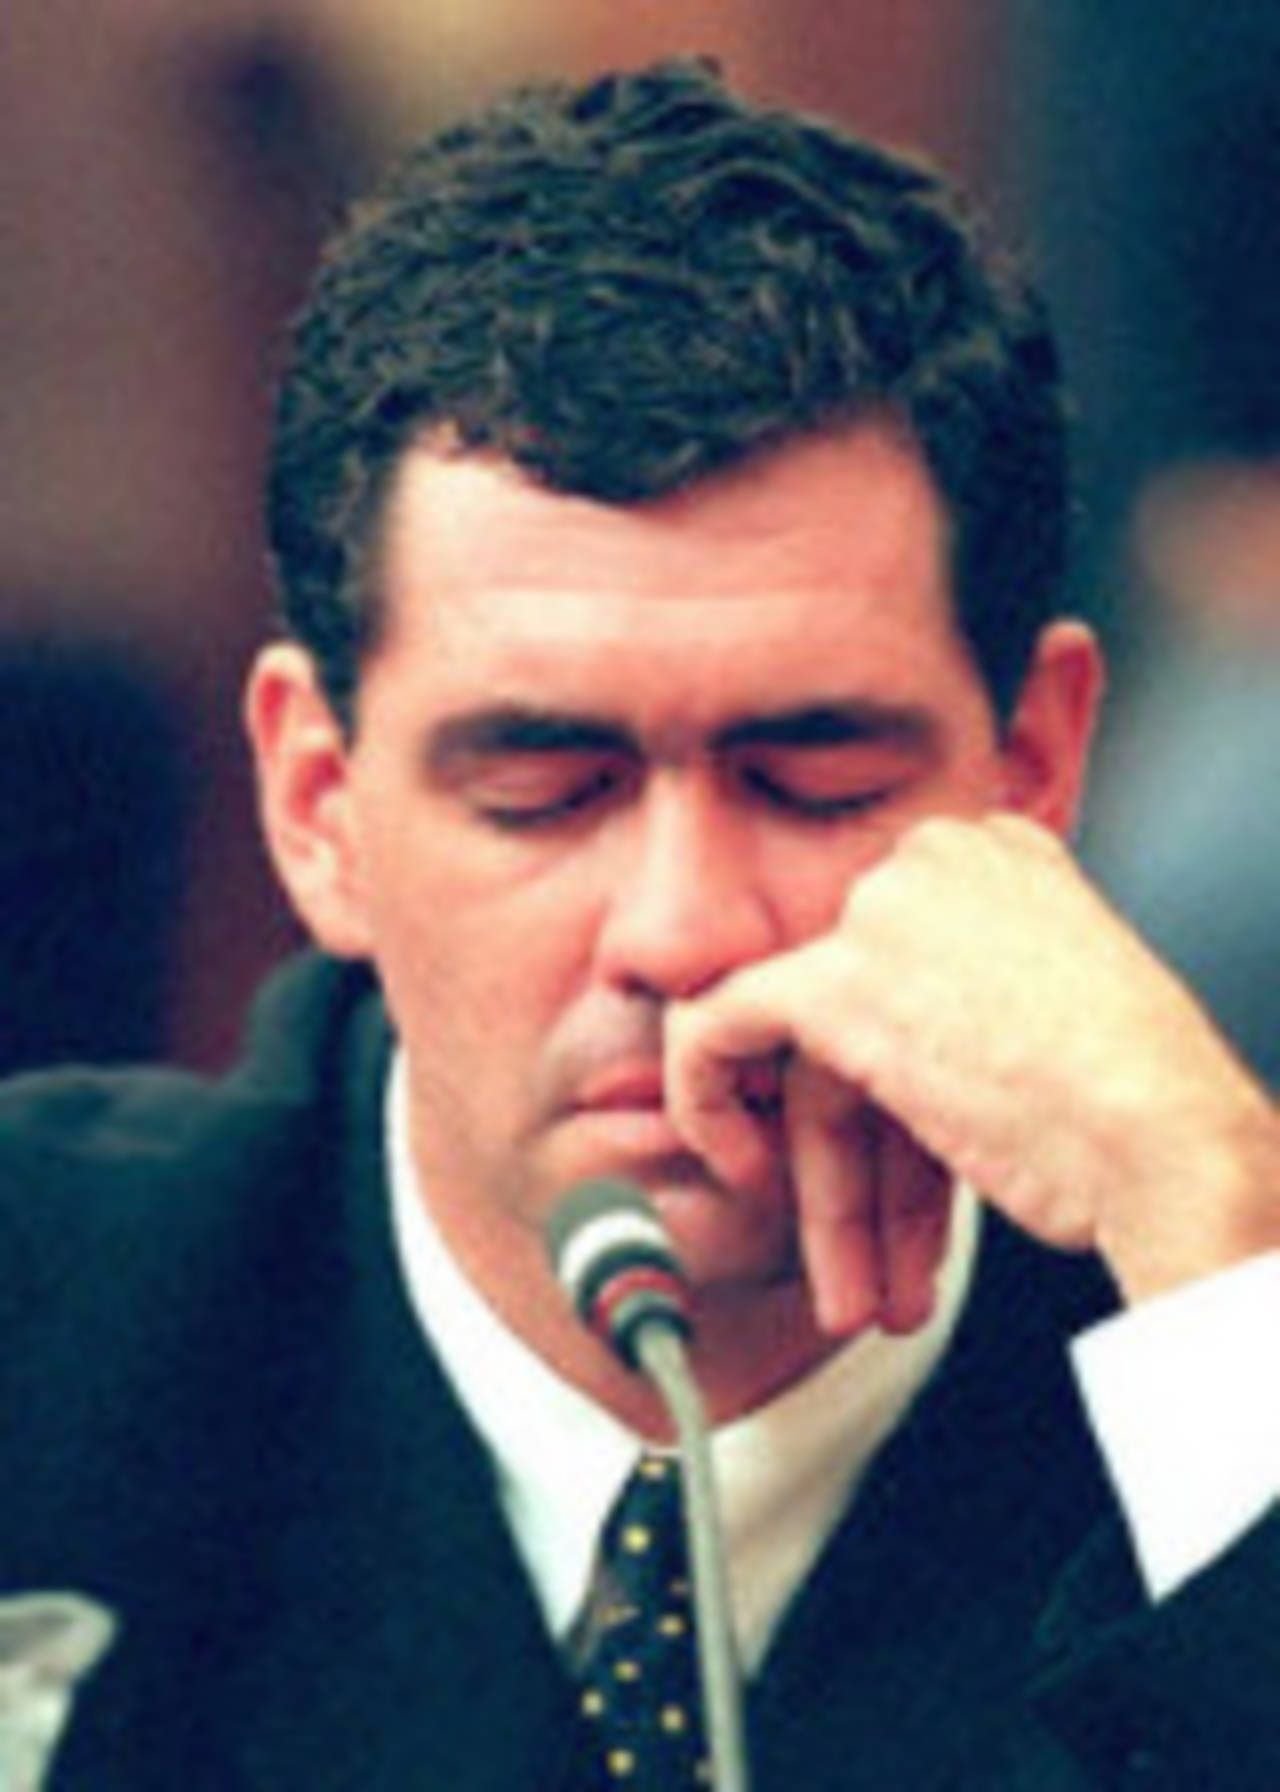 Former South African cricket captain Hansie Cronje breaks down at the end of his cross-examination before the King Commission of Inquiry into match-fixing allegations in Cape Town 23 June 2000.